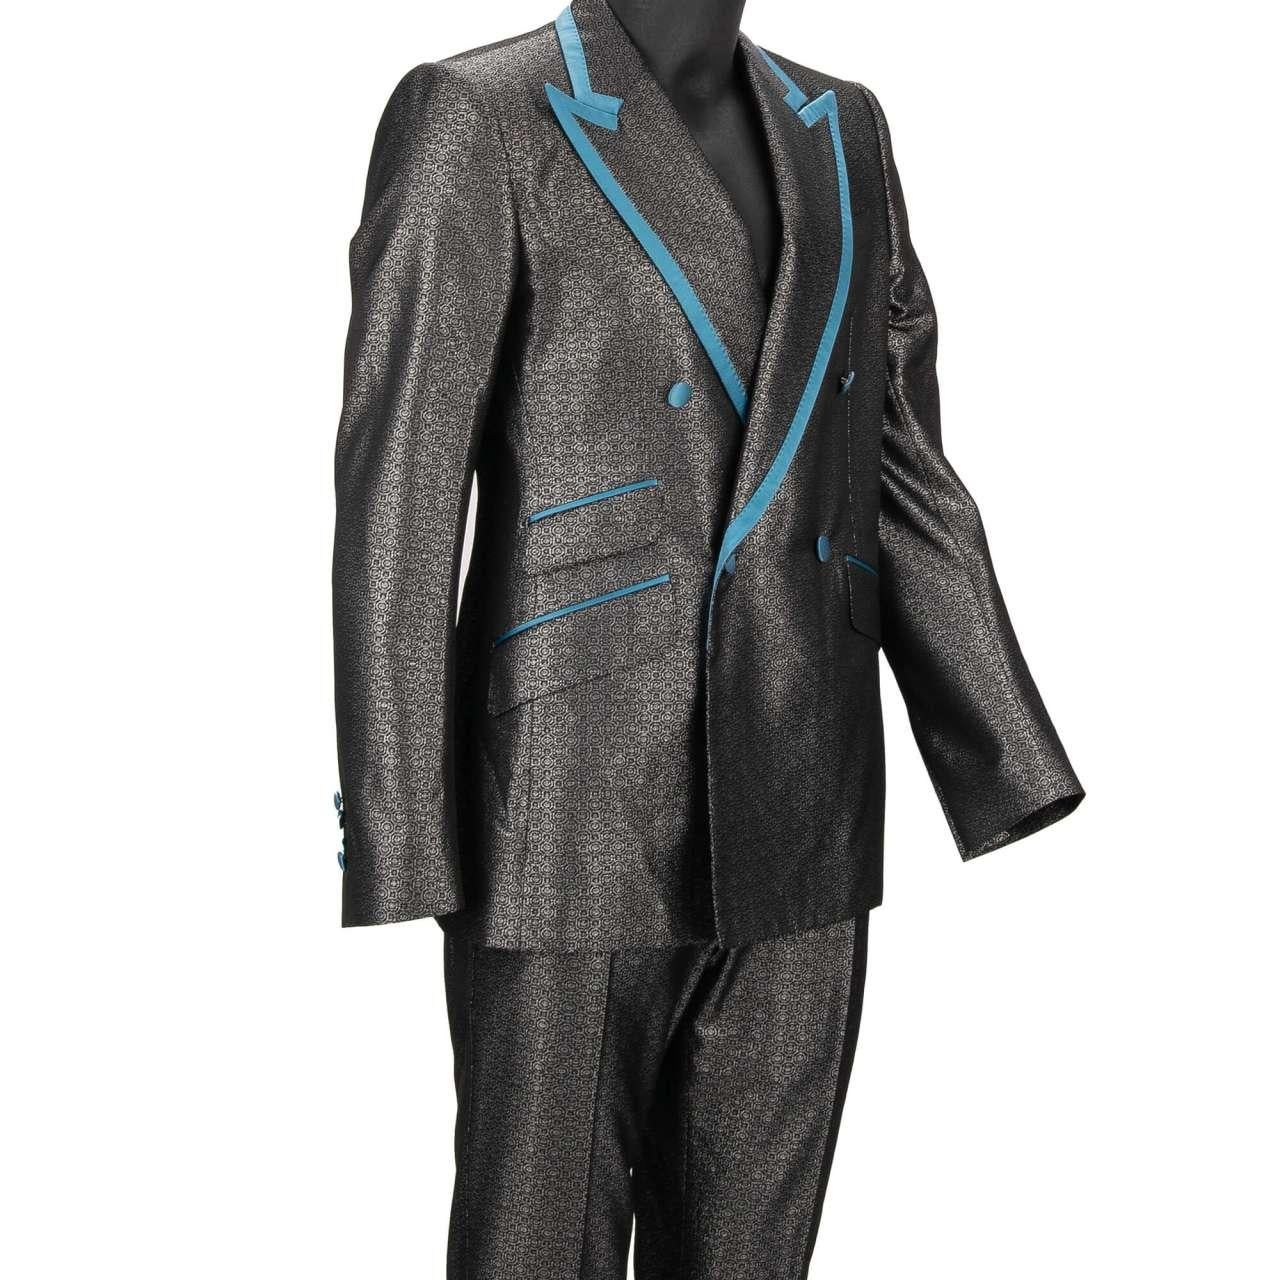 Dolce & Gabbana Glitter Jacquard Double breasted Suit Silver Blue 48 US 38 M For Sale 4